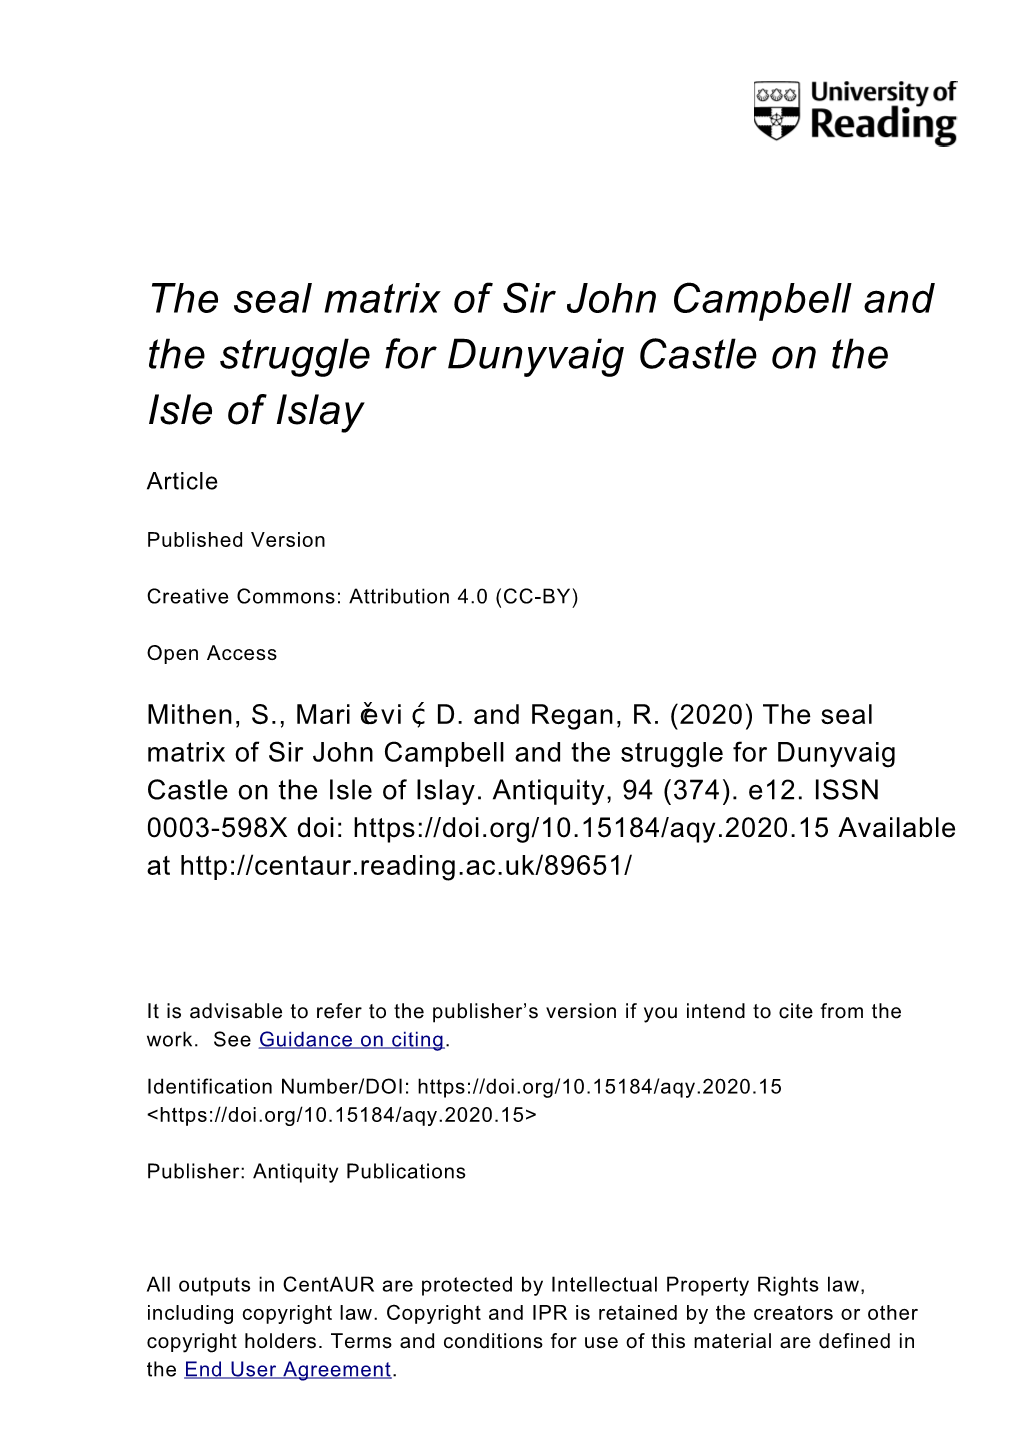 The Seal Matrix of Sir John Campbell and the Struggle for Dunyvaig Castle on the Isle of Islay